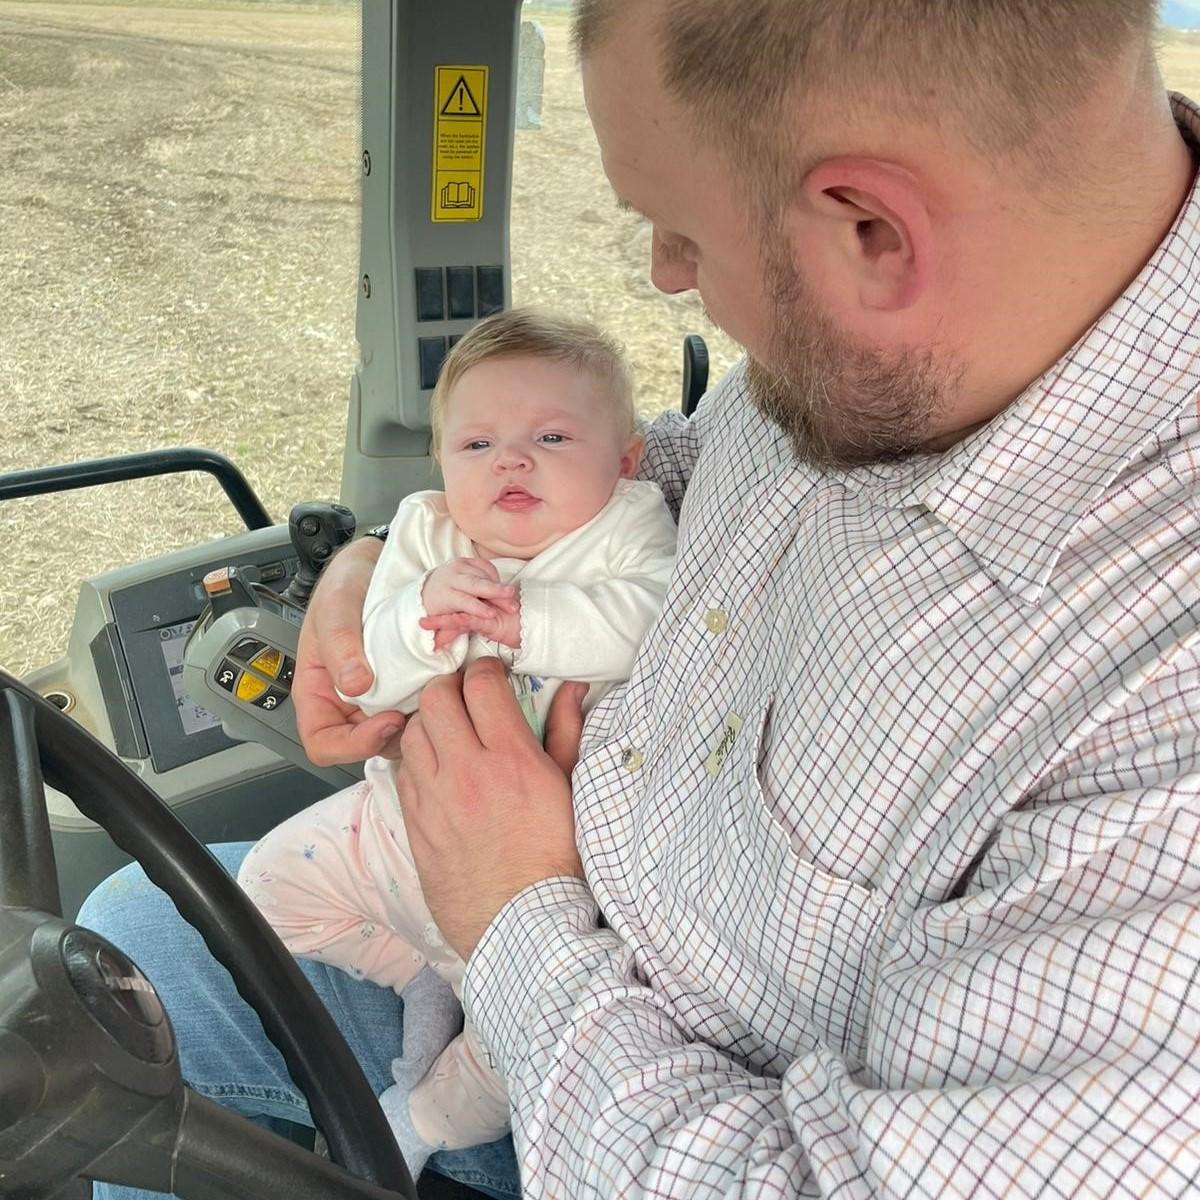 Emma Kinross - 11 week old Mirren Blennie in the tractor for the first time with her dad Robert Blennie